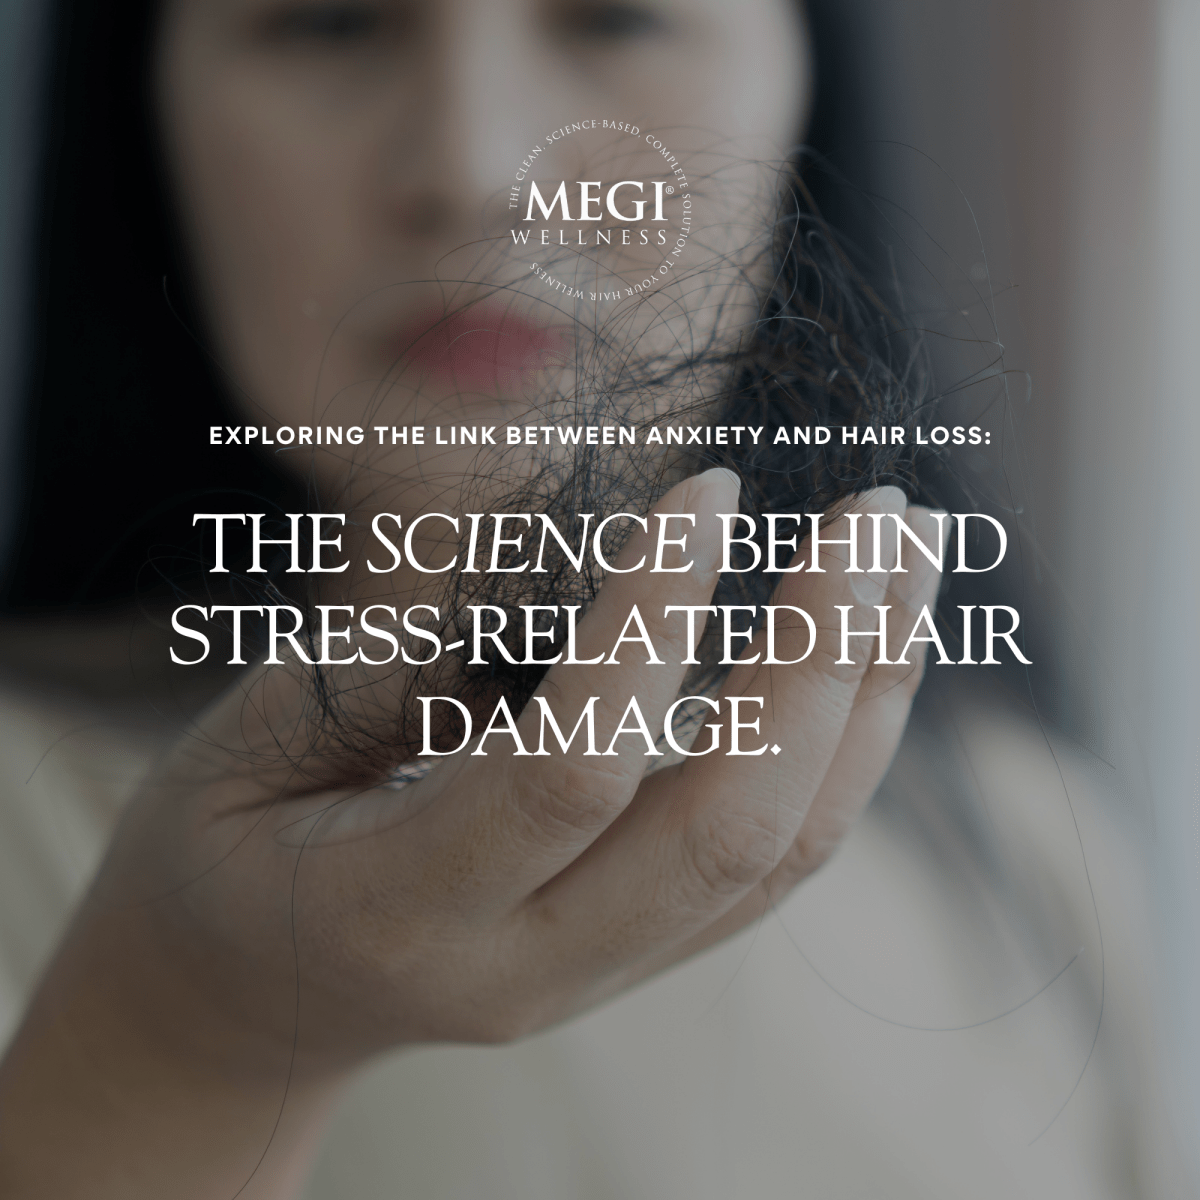 Exploring the Link Between Anxiety and Hair Loss: The Science Behind Stress-Related Hair Damage. - MEGIWellness